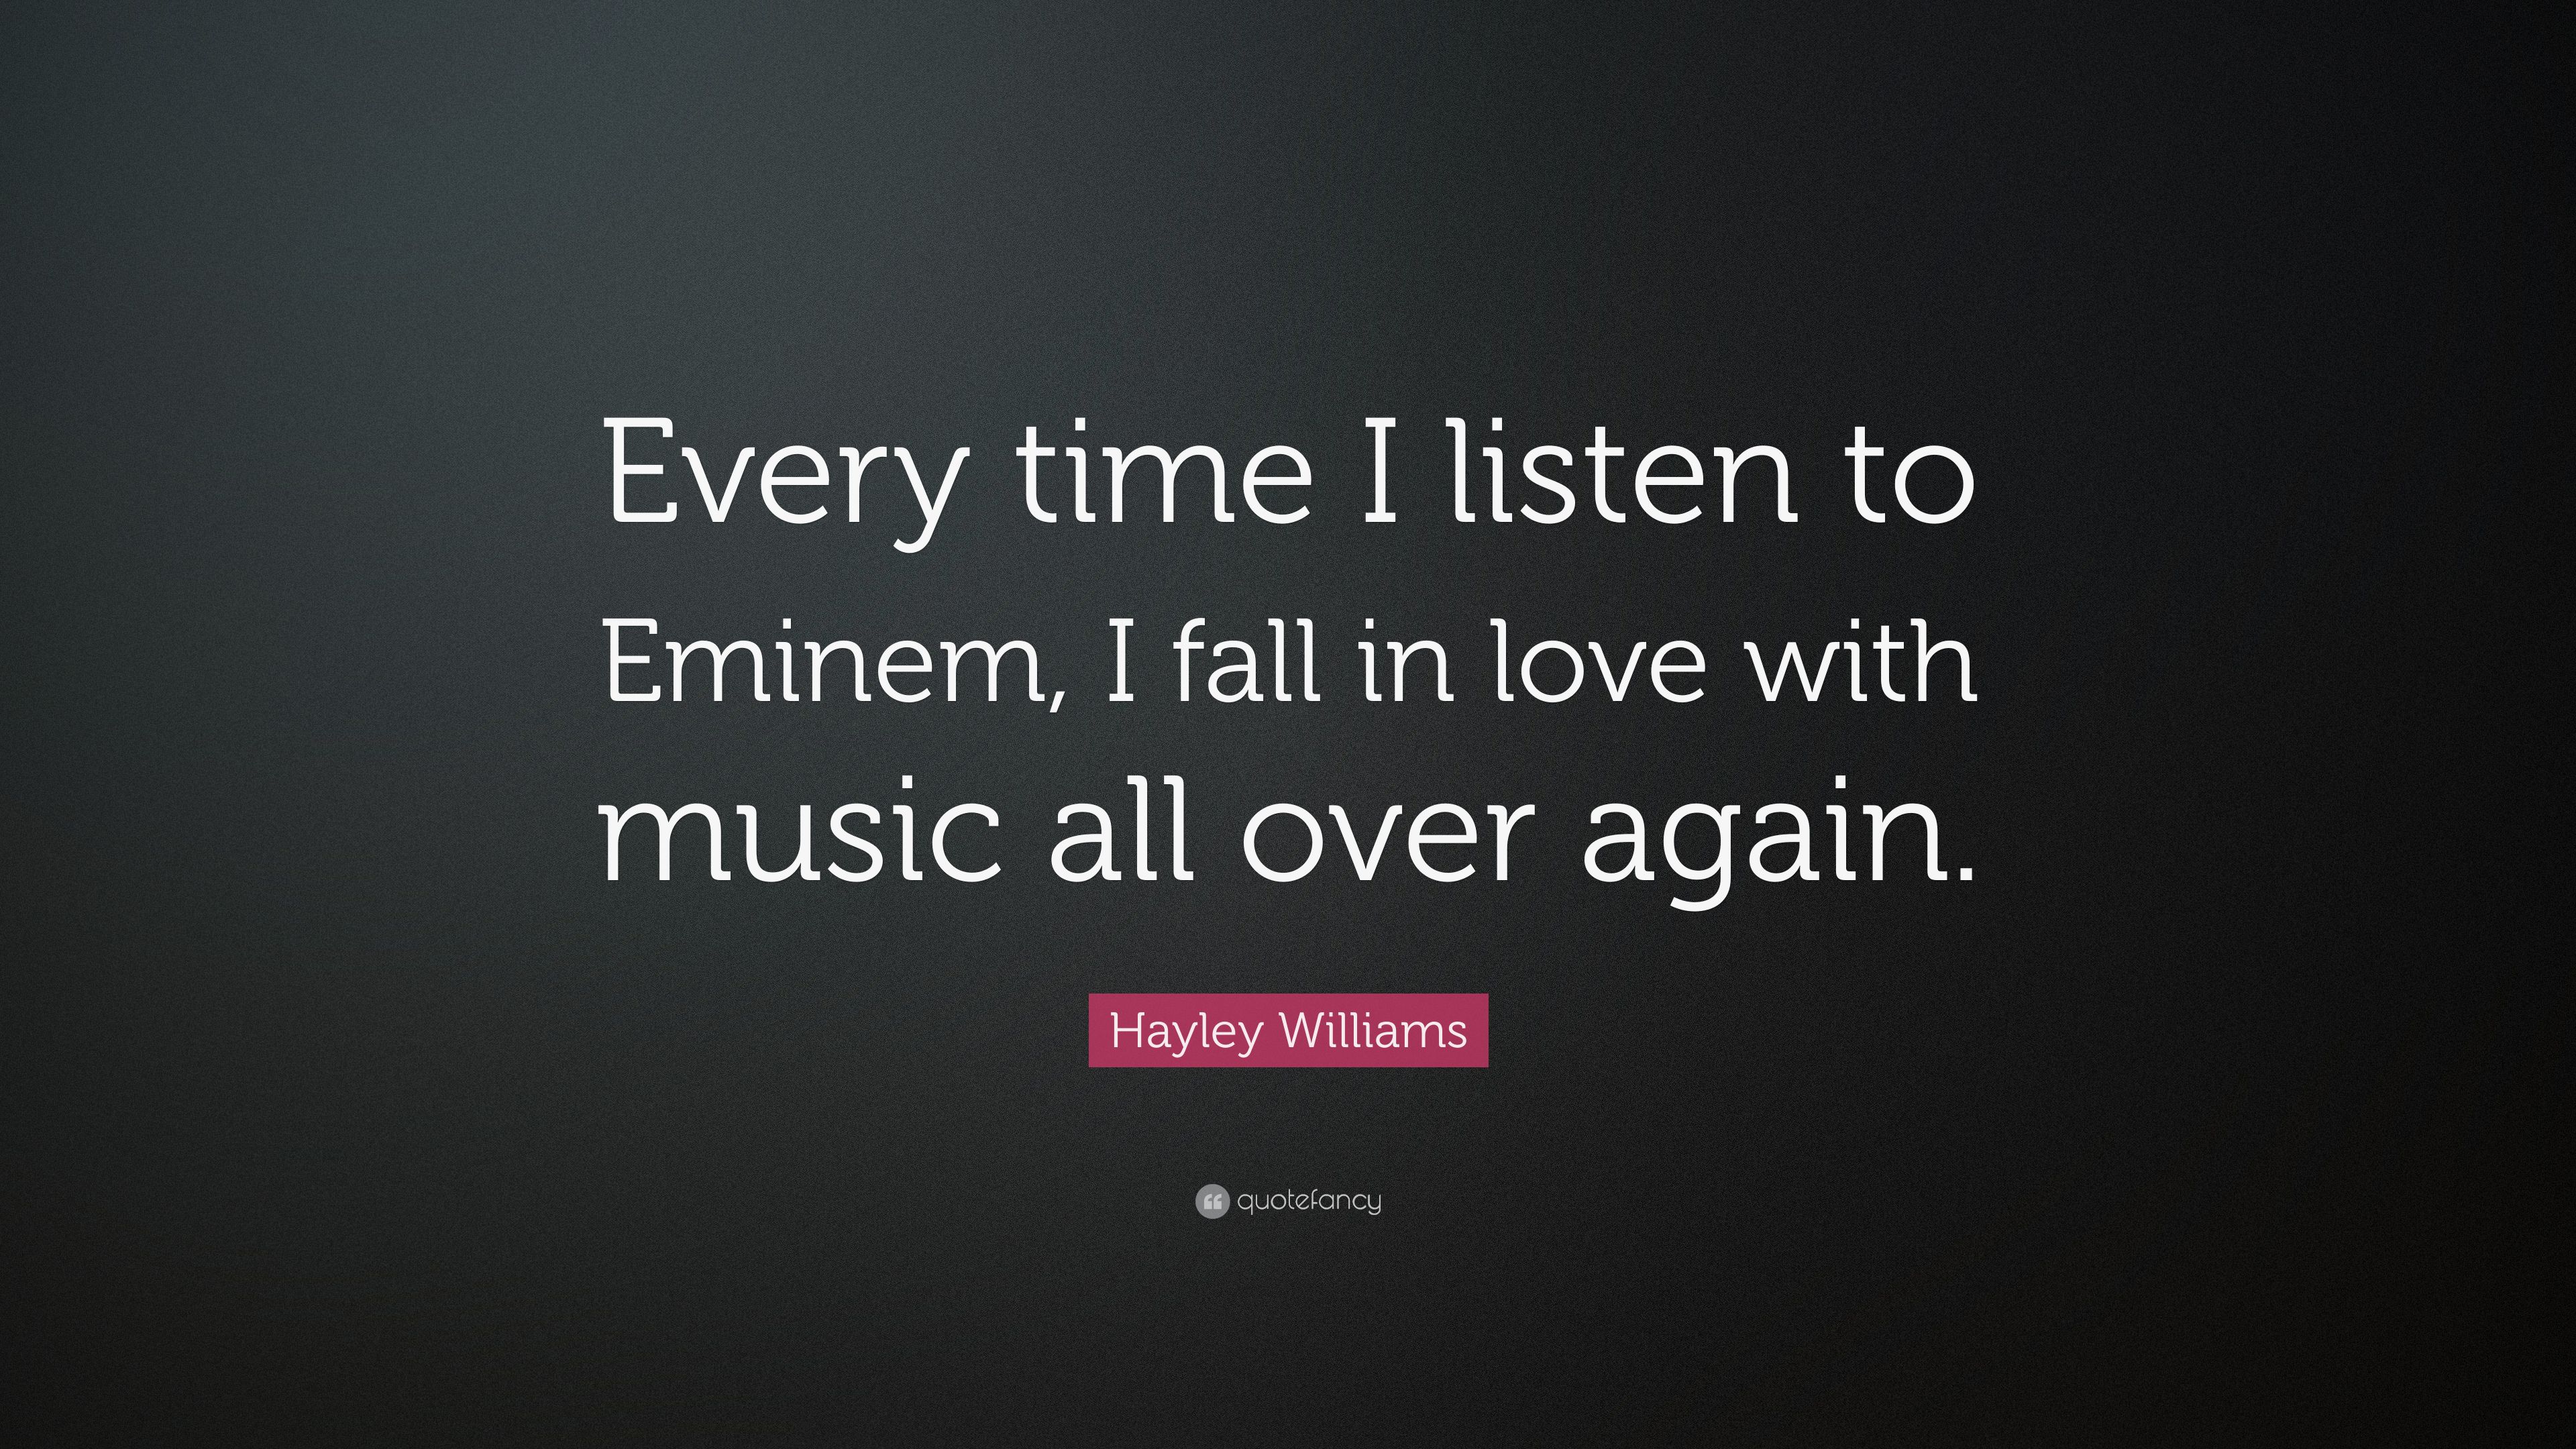 Hayley Williams Quote: “Every time I listen to Eminem, I fall